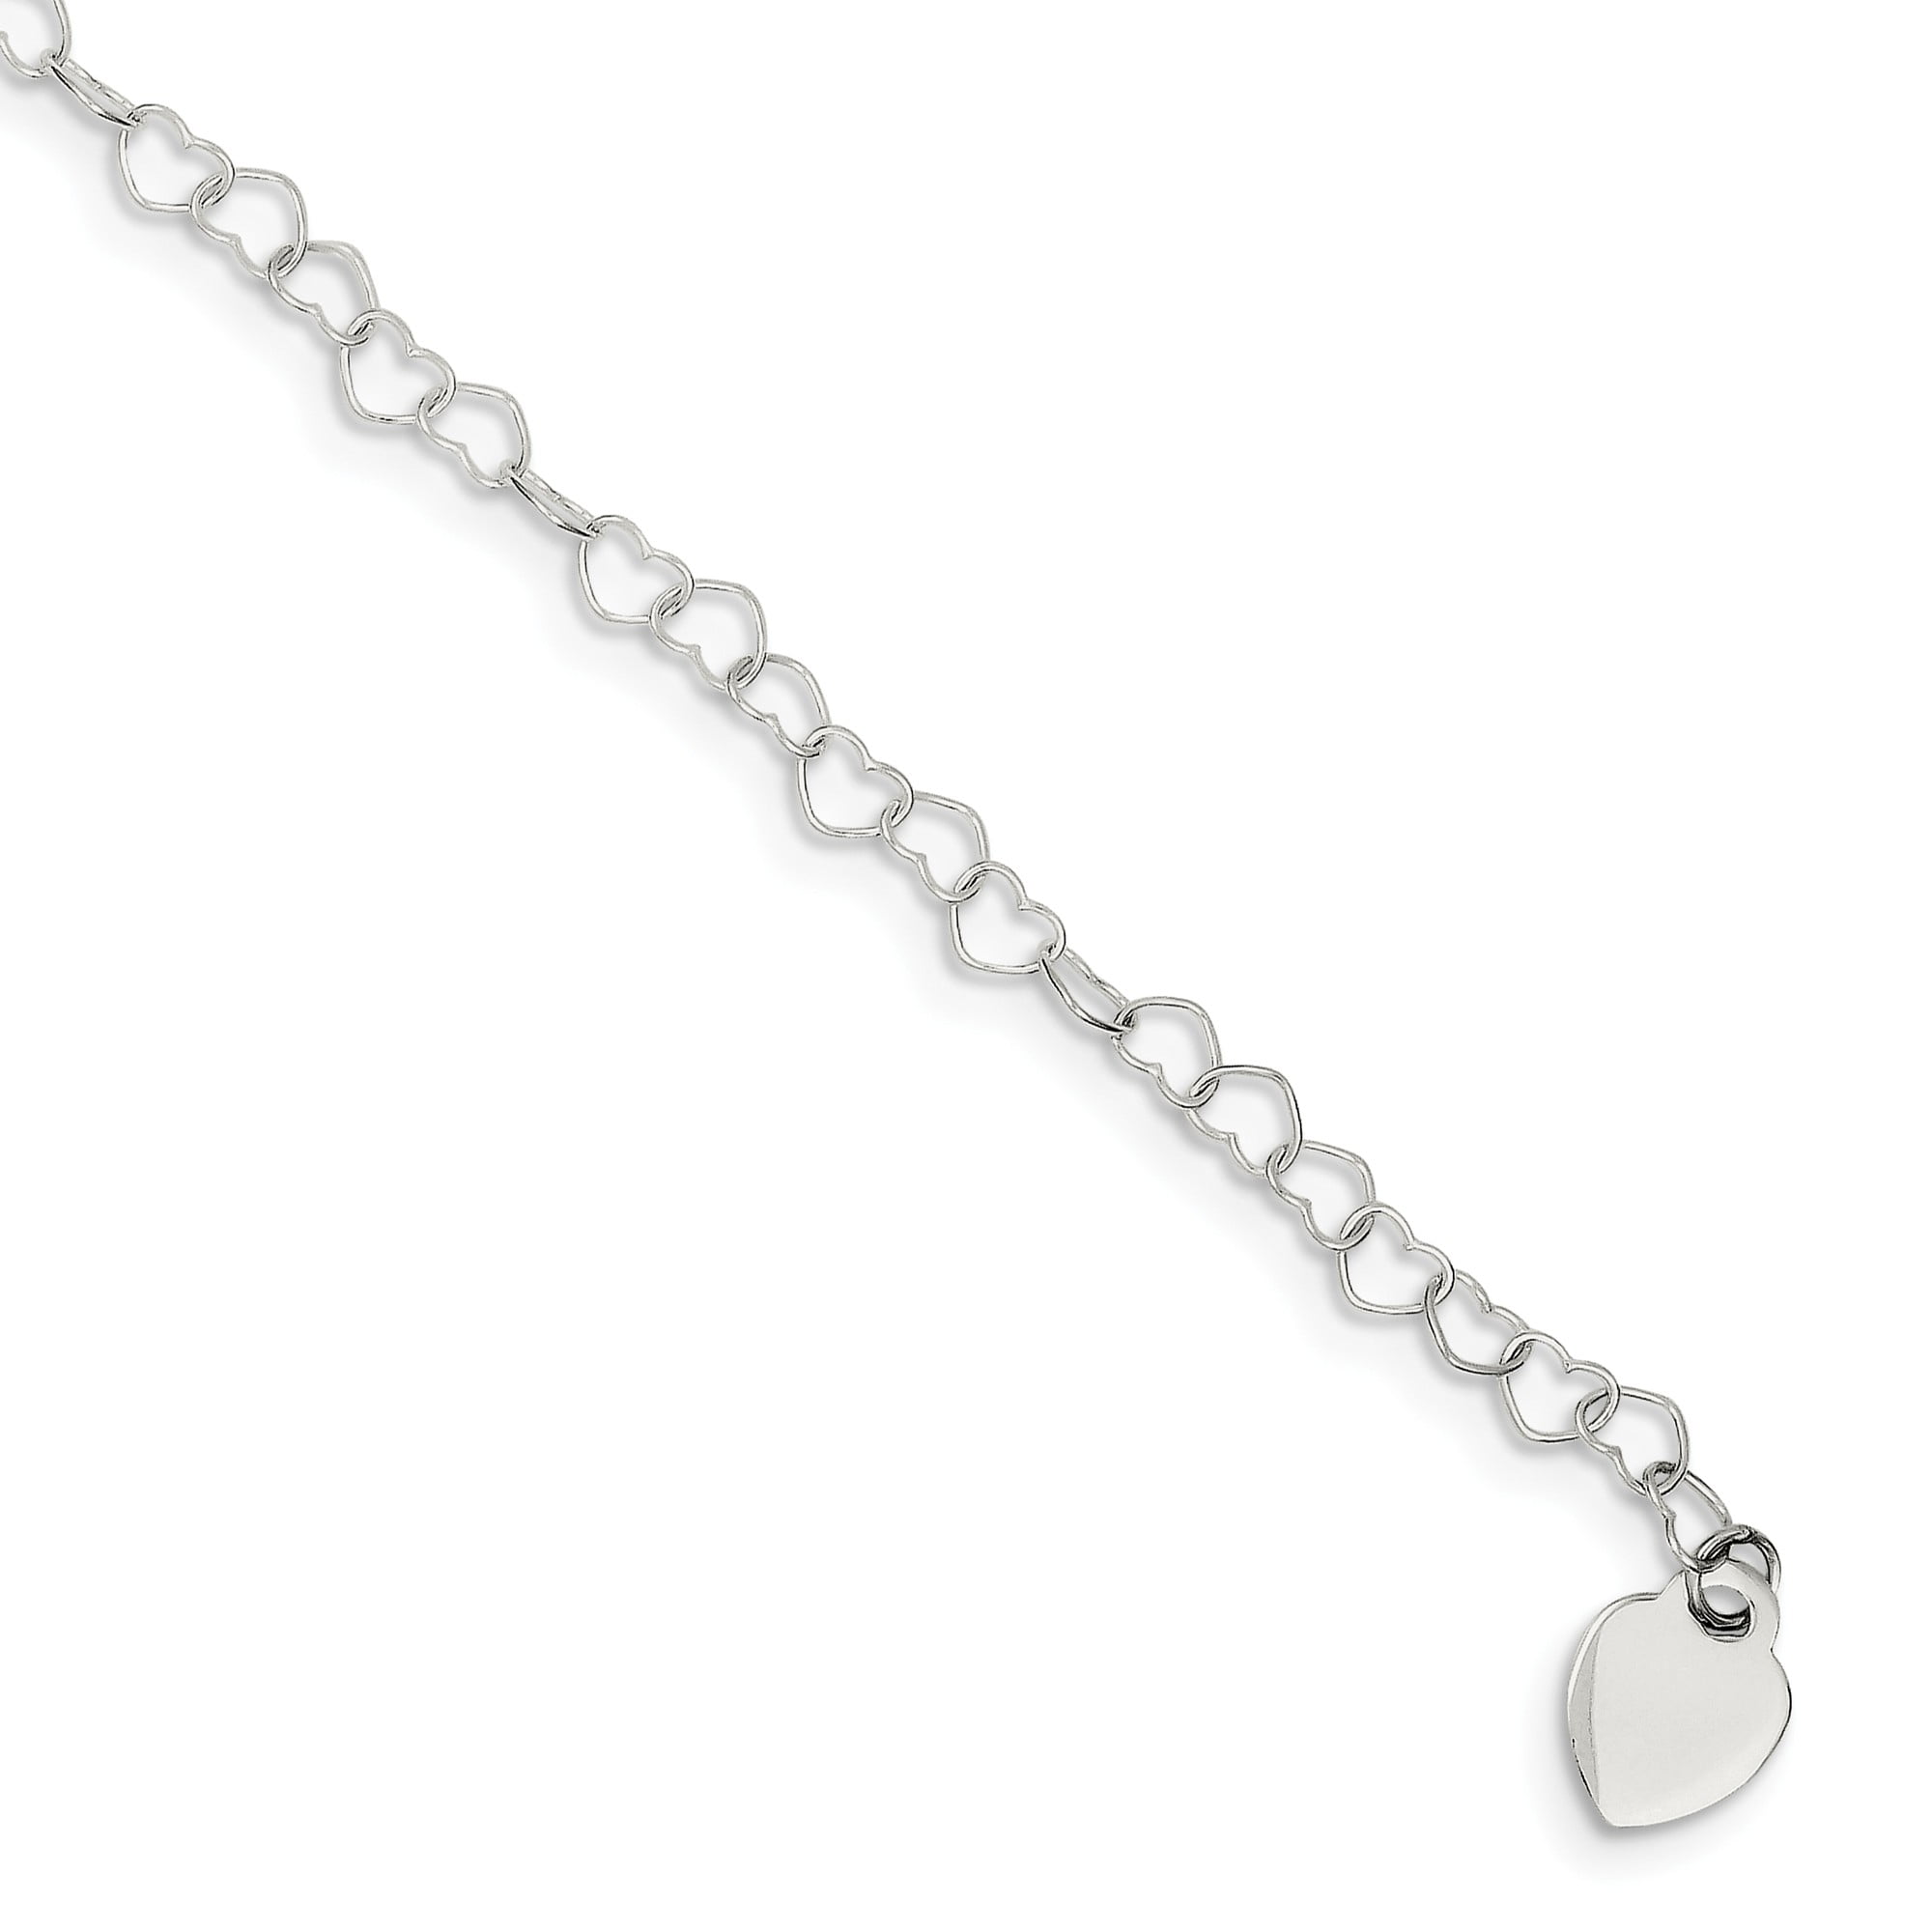 Sterling Silver Polished 3-D Puffed Fancly HeartLink Bracelet With Lobster Clasp Length 7.5 Inch